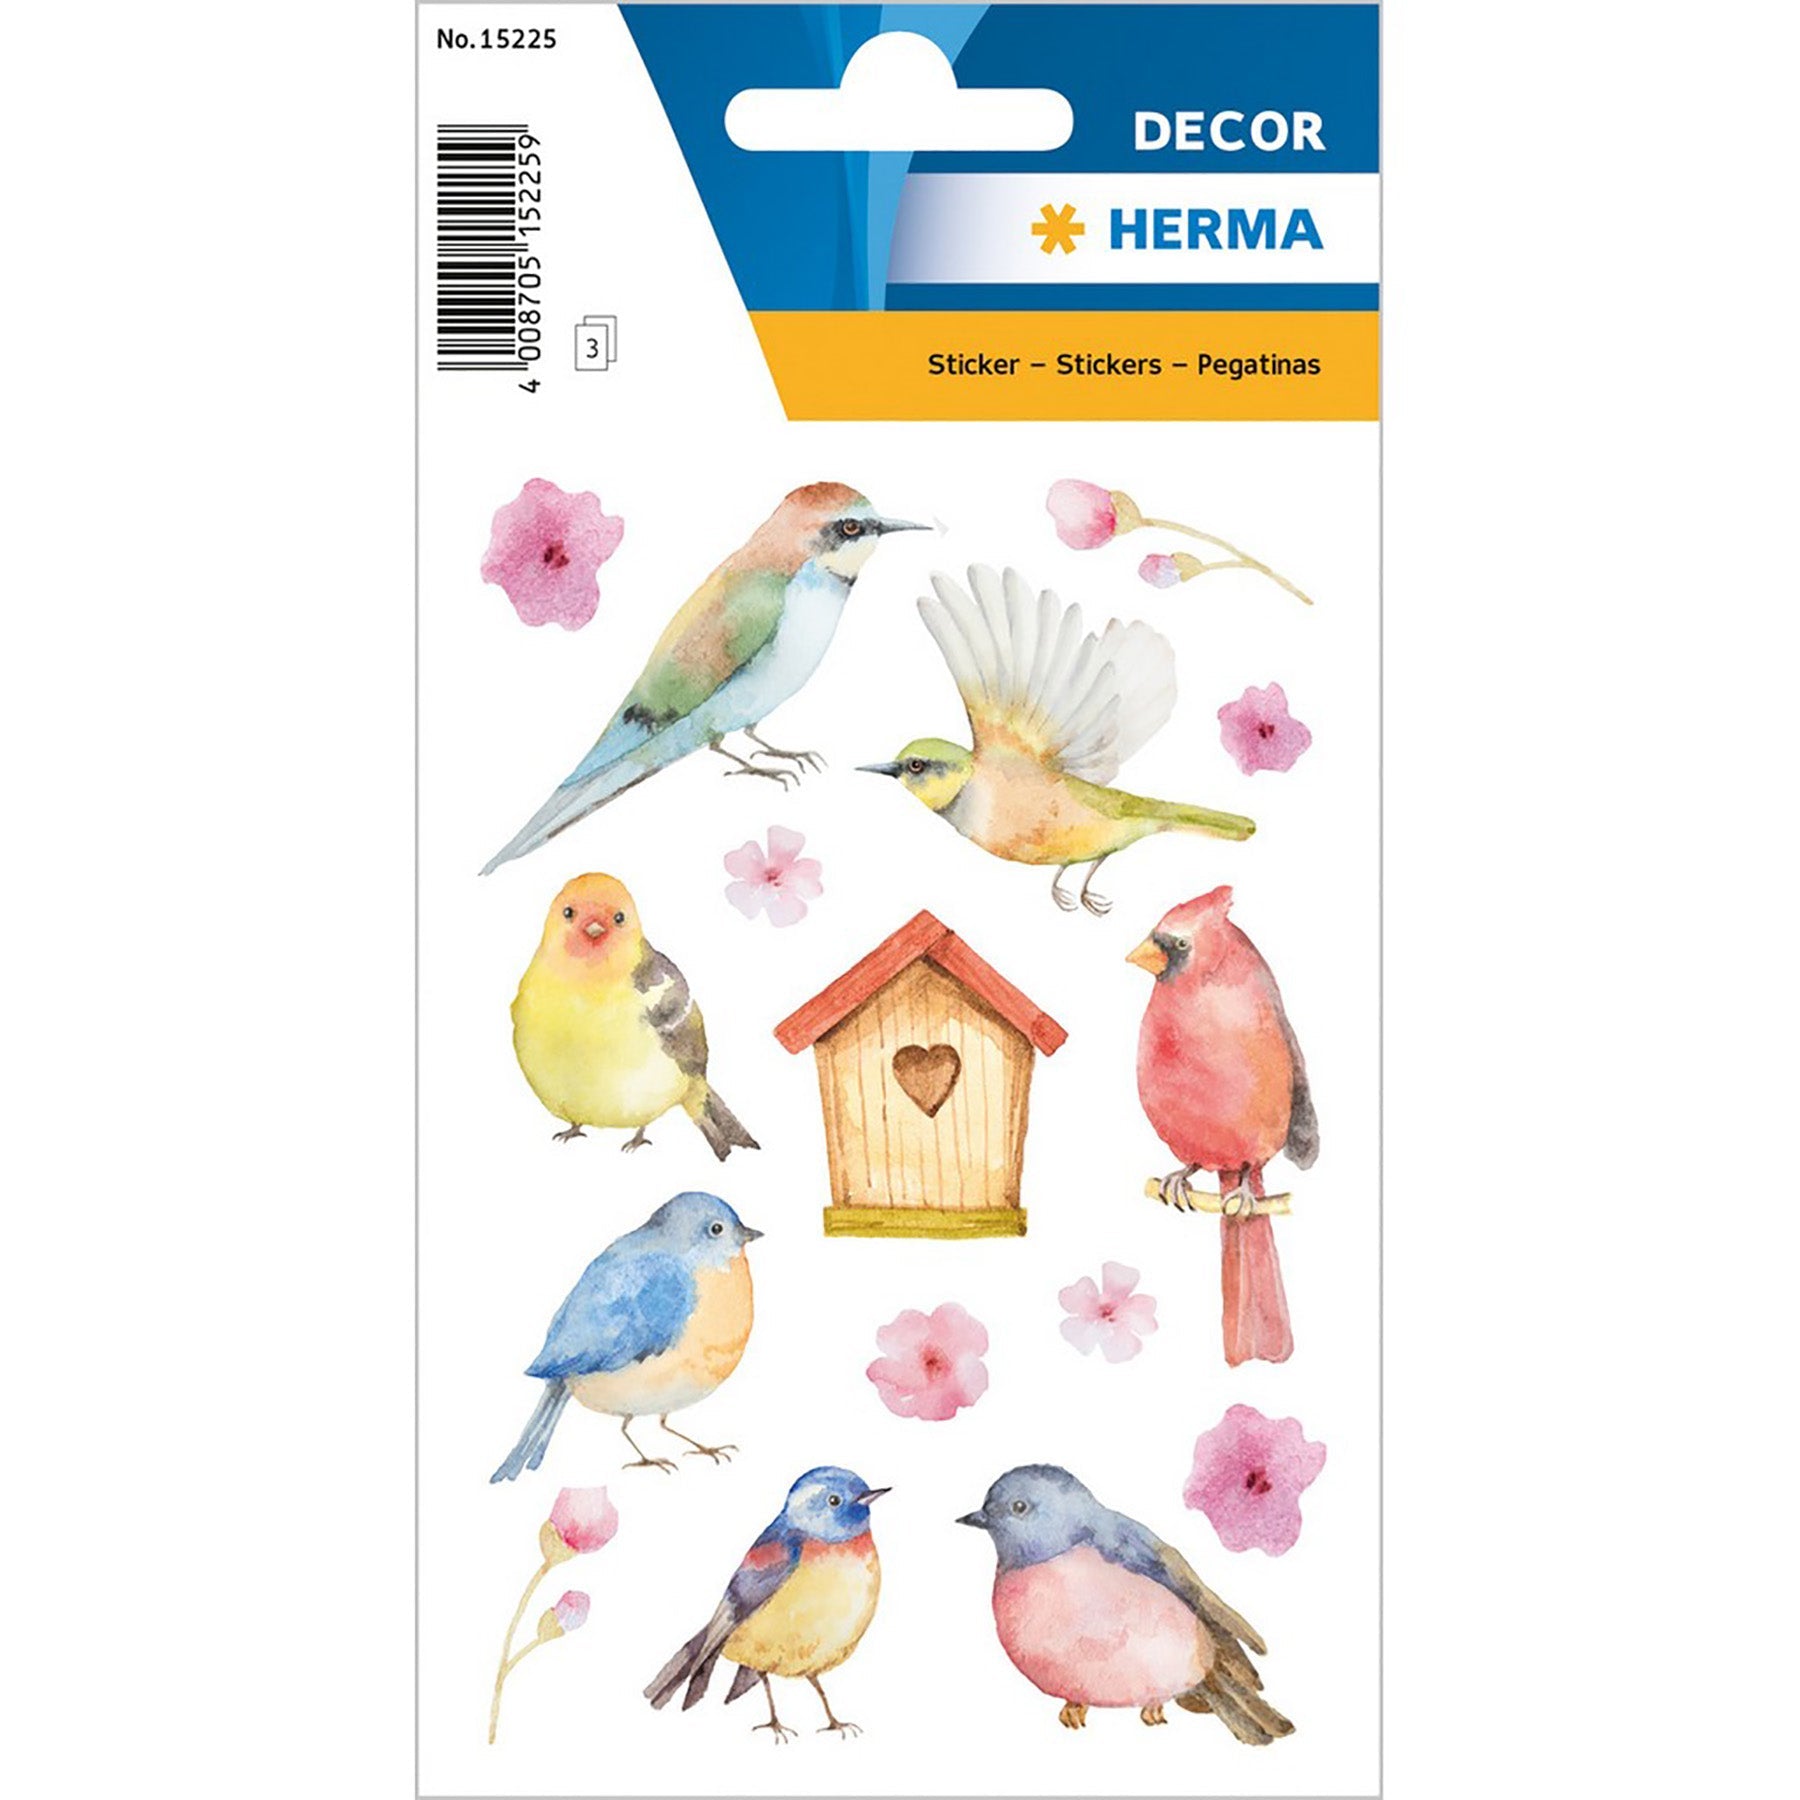 Herma Décor 3 Sheets Stickers Songbirds 4.75x3.1in Sheet